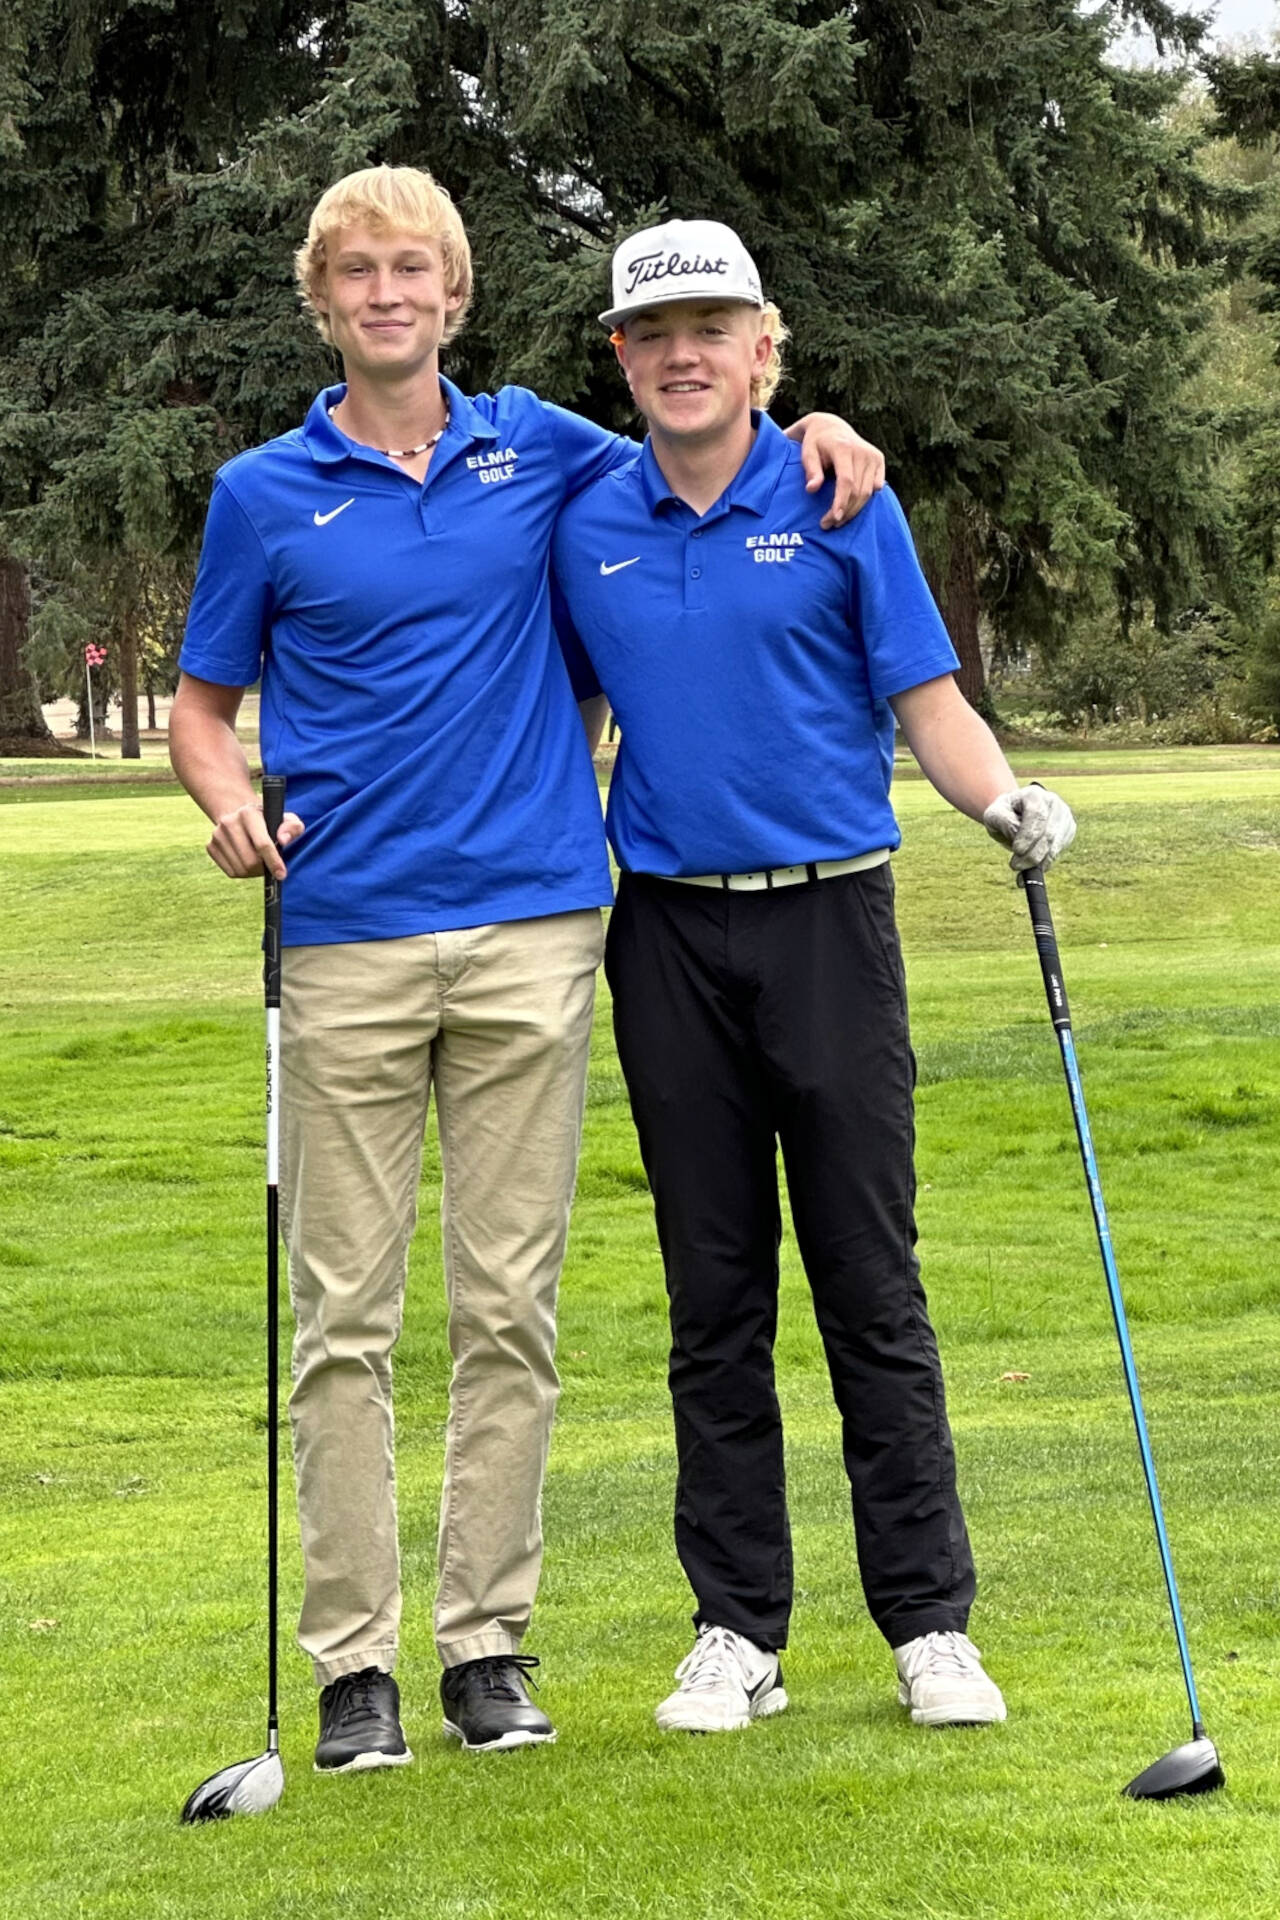 SUBMITTED PHOTO Elma golfers Cason Seaberg, left, and Grant Vessey earned co-Medalist honors with identical scores of 42 in a 185-192 win over King’s Way Christian on Tuesday in Vancouver.